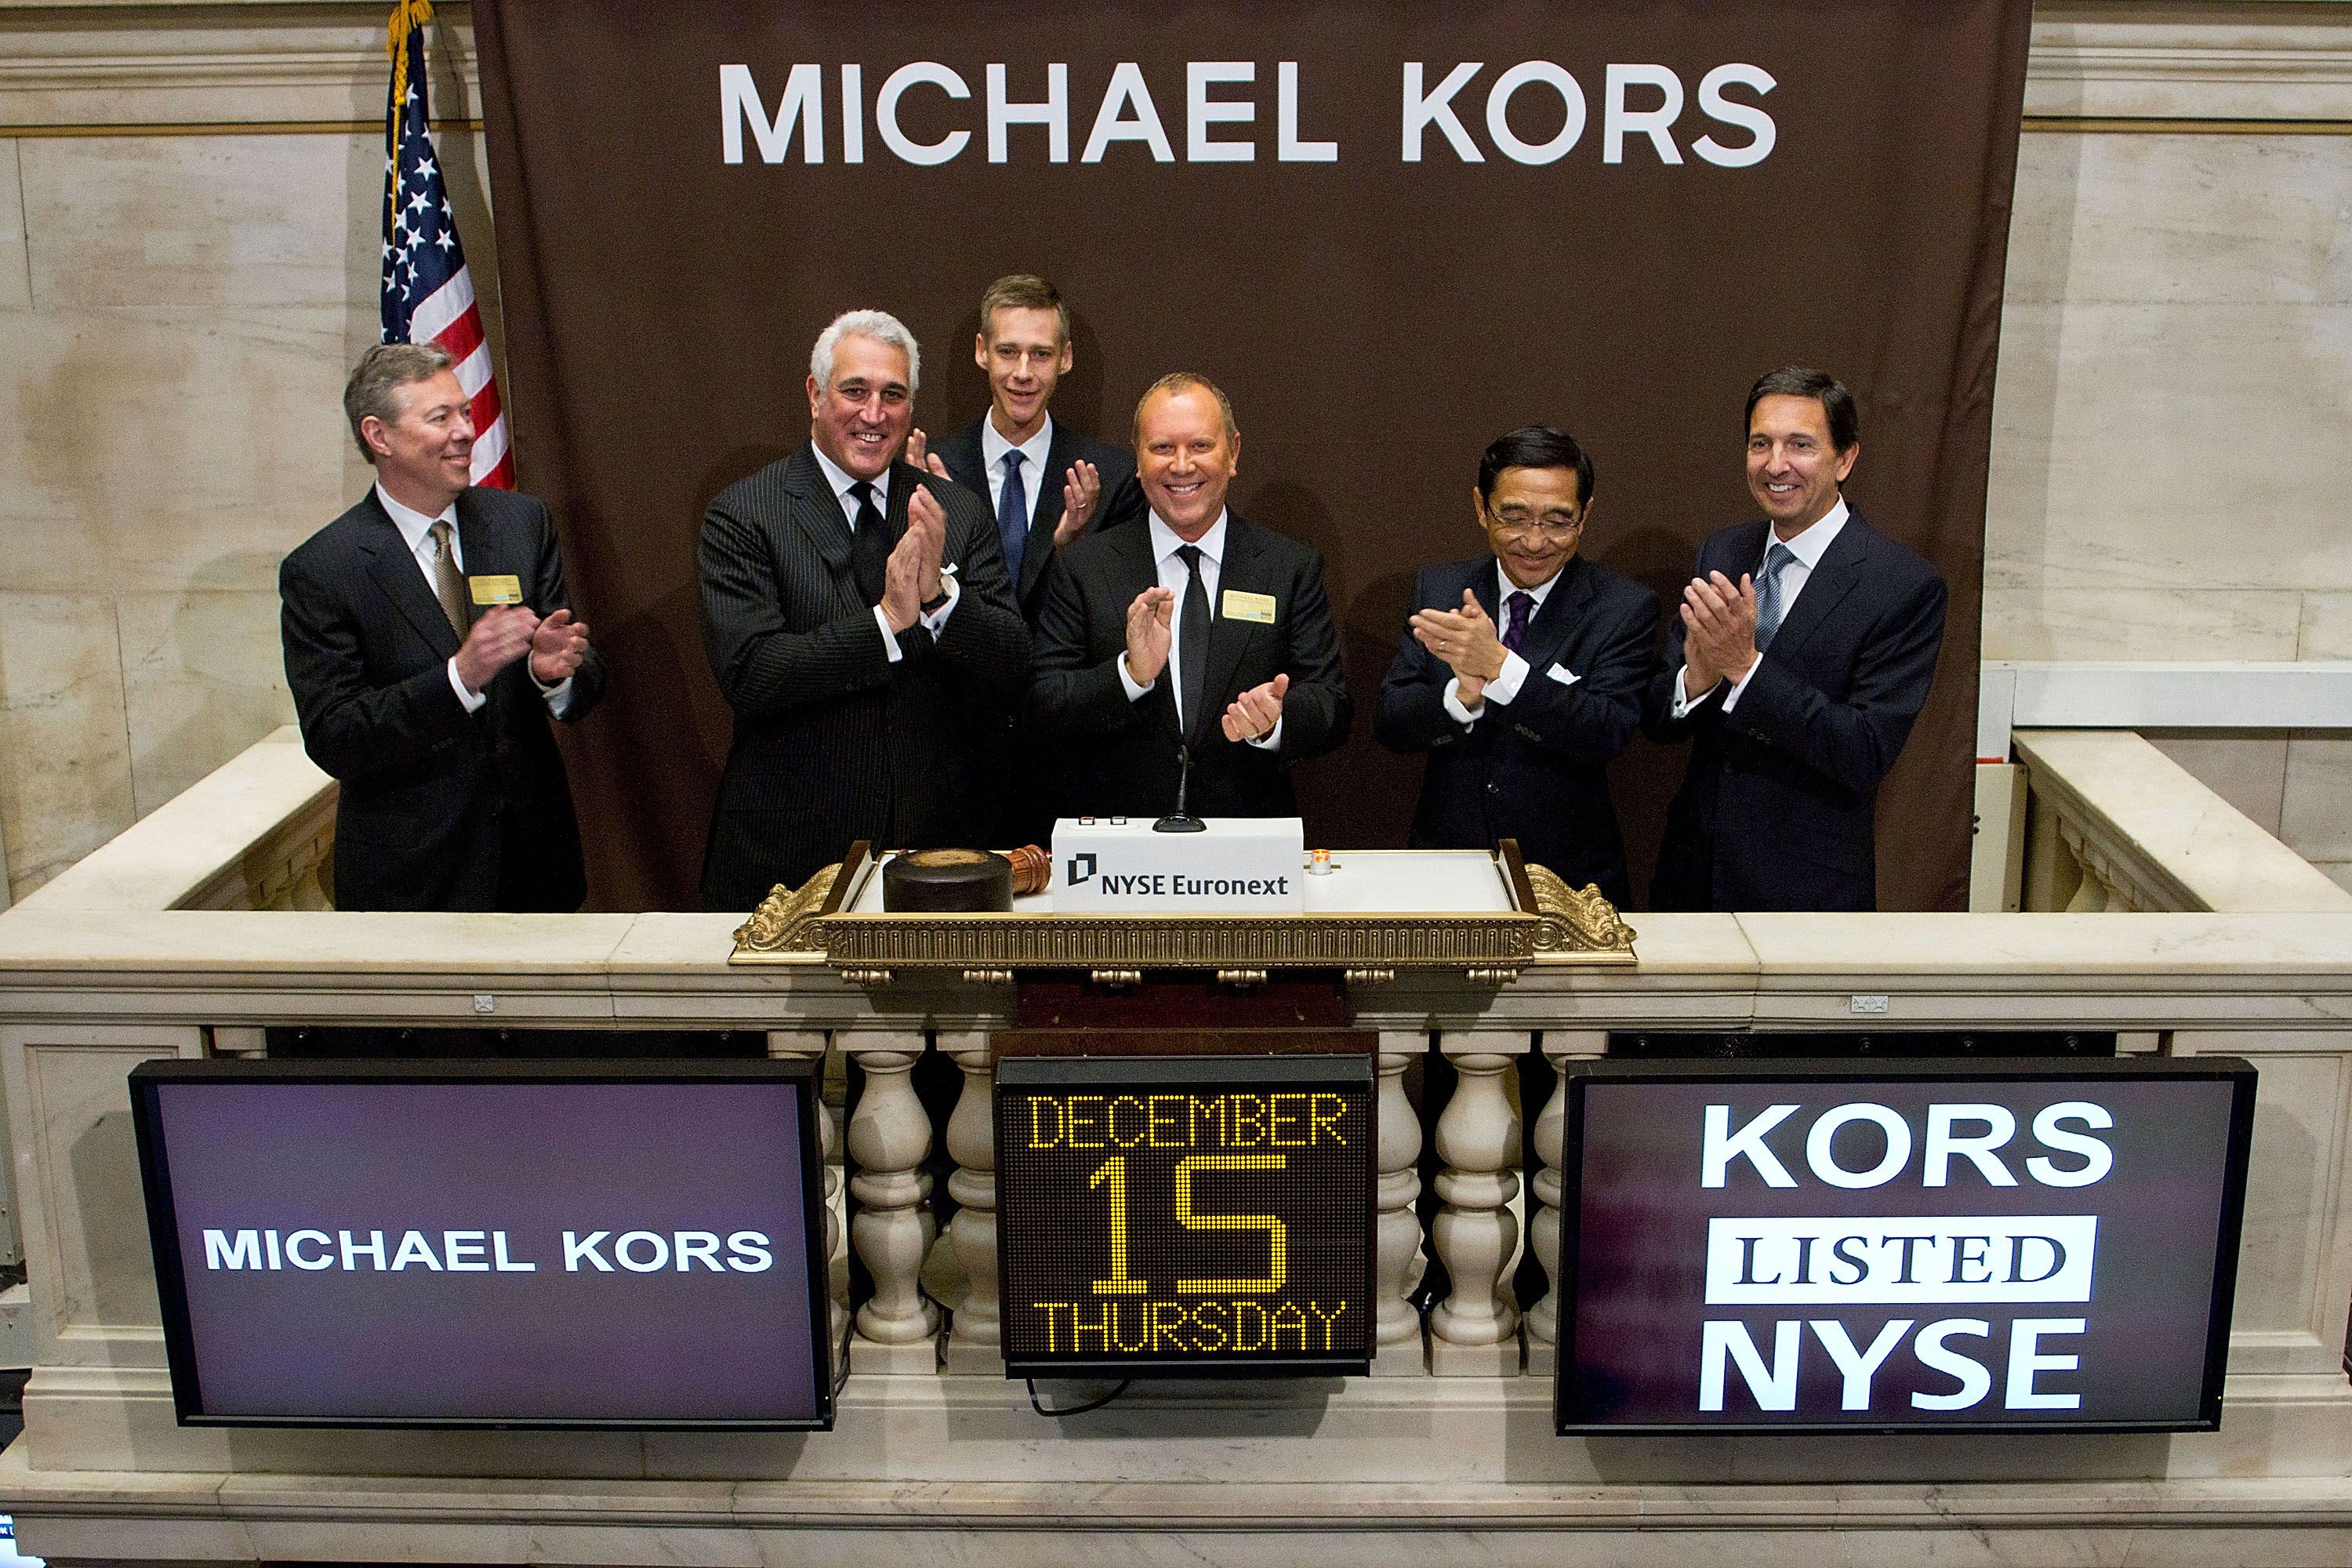 michael kors holding limited